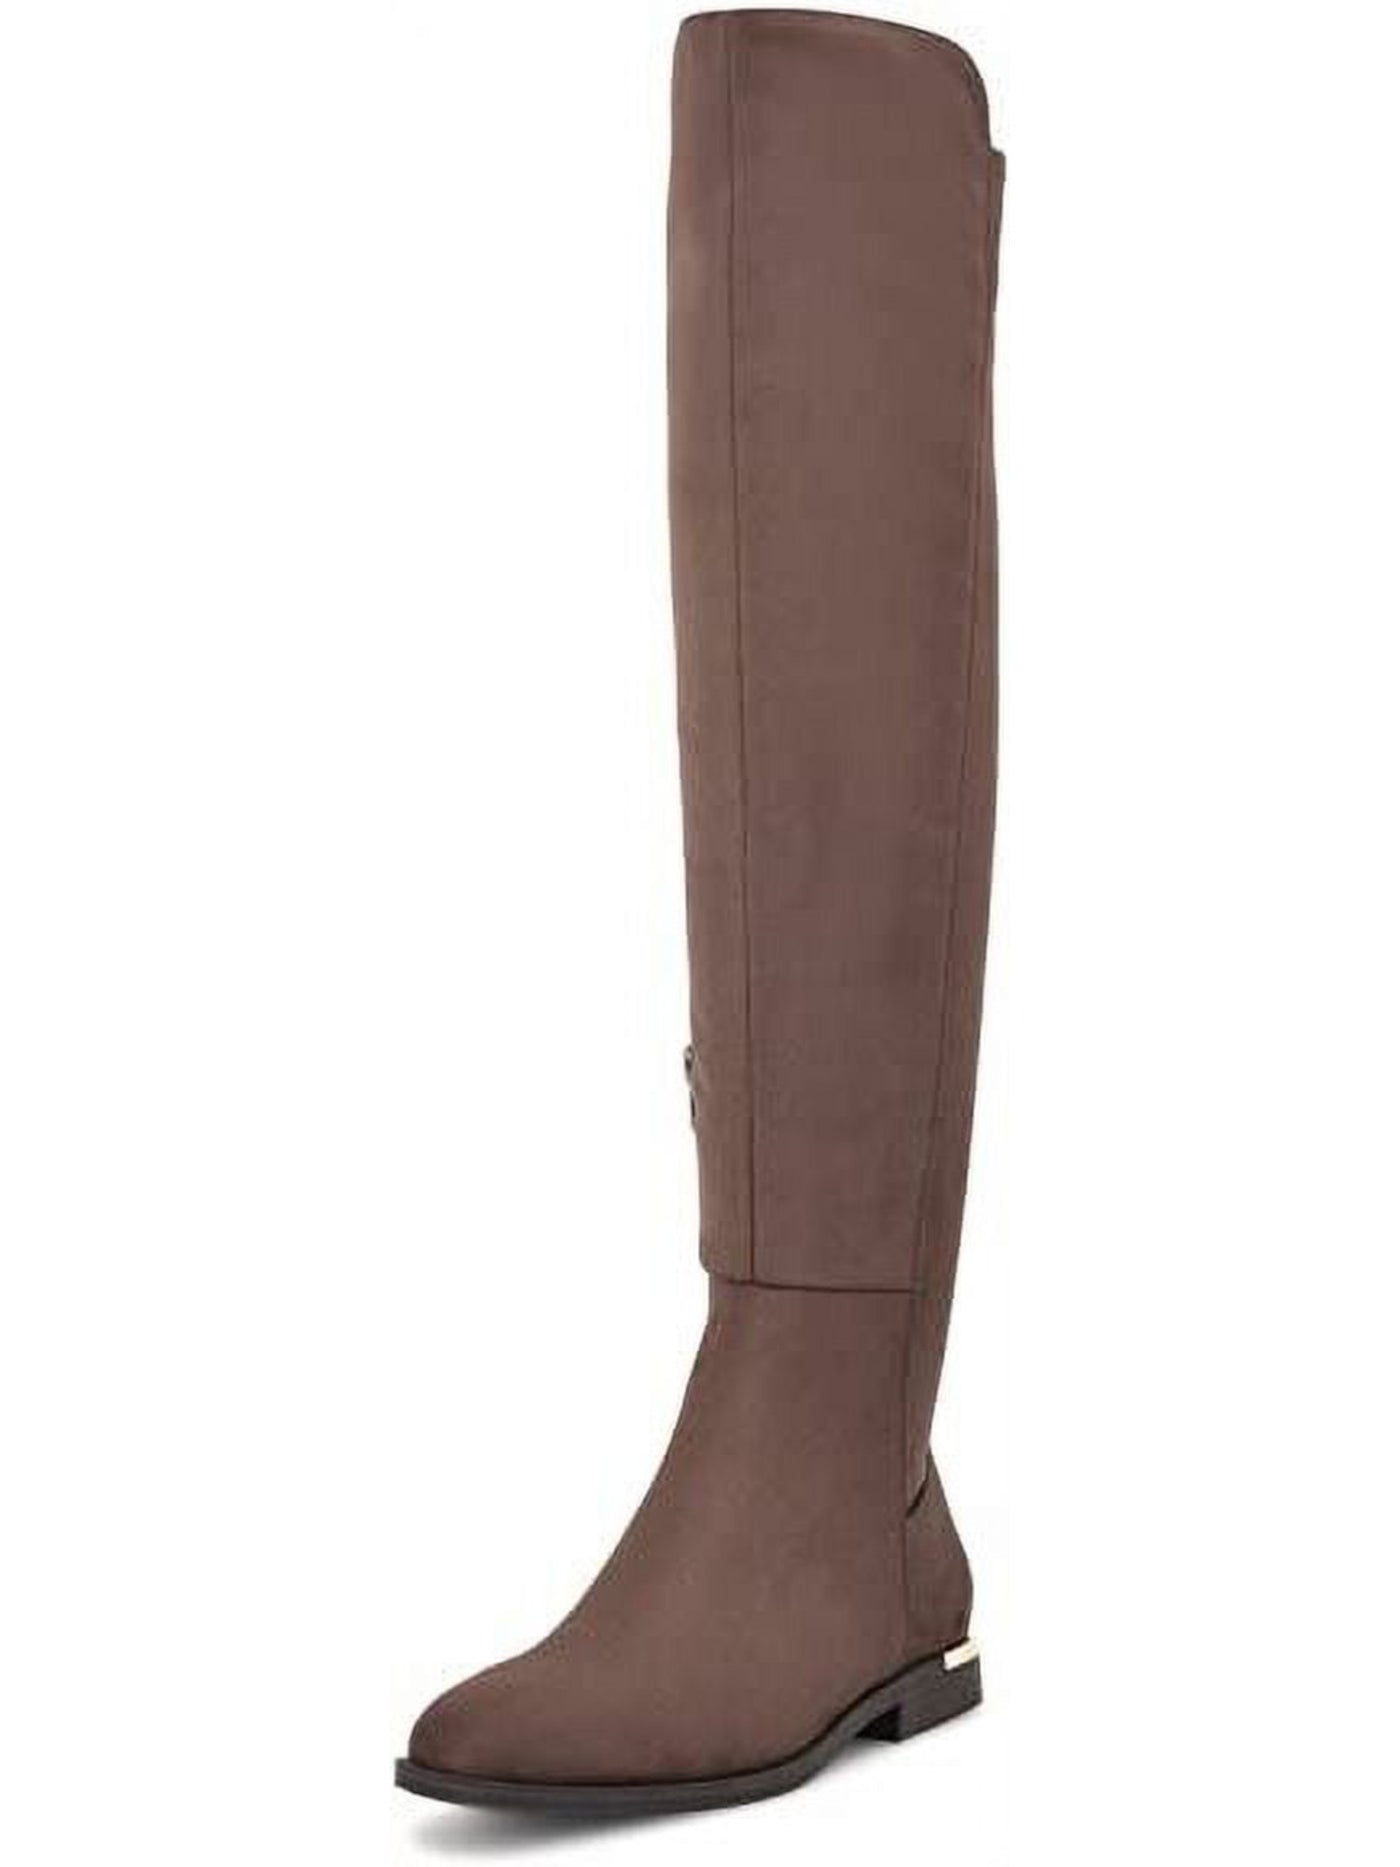 NINE WEST Womens Brown Padded Allair Round Toe Zip-Up Boots Shoes 7 M